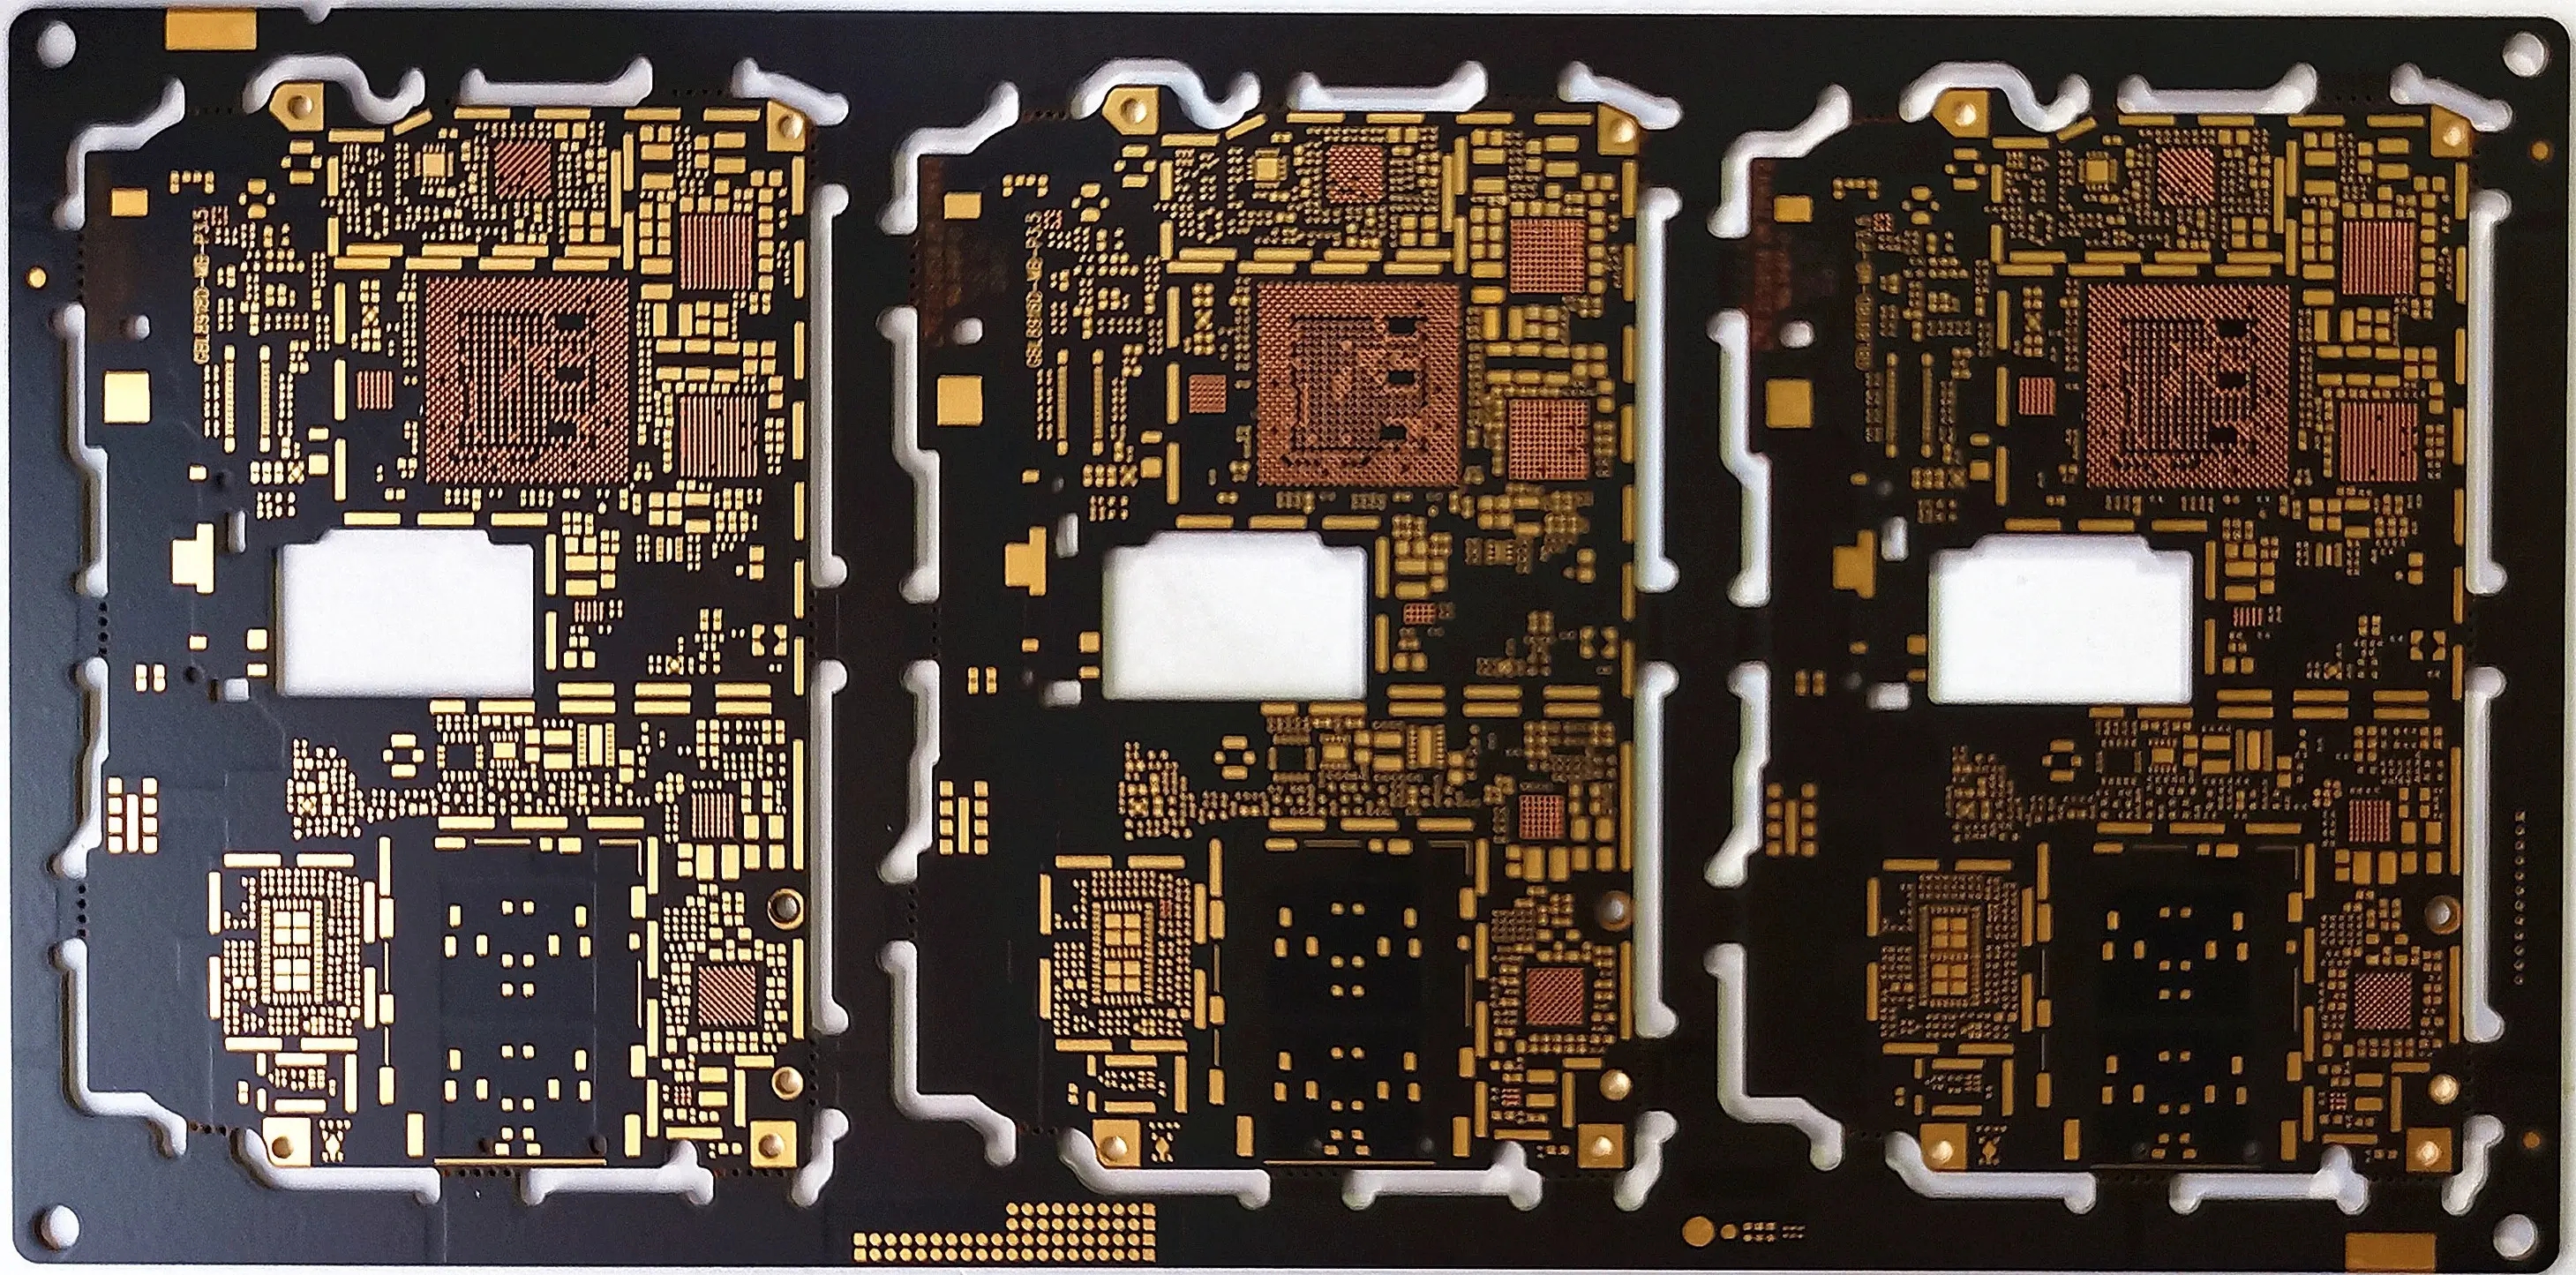 PCB thermal stress test method and how to improve thermal reliability